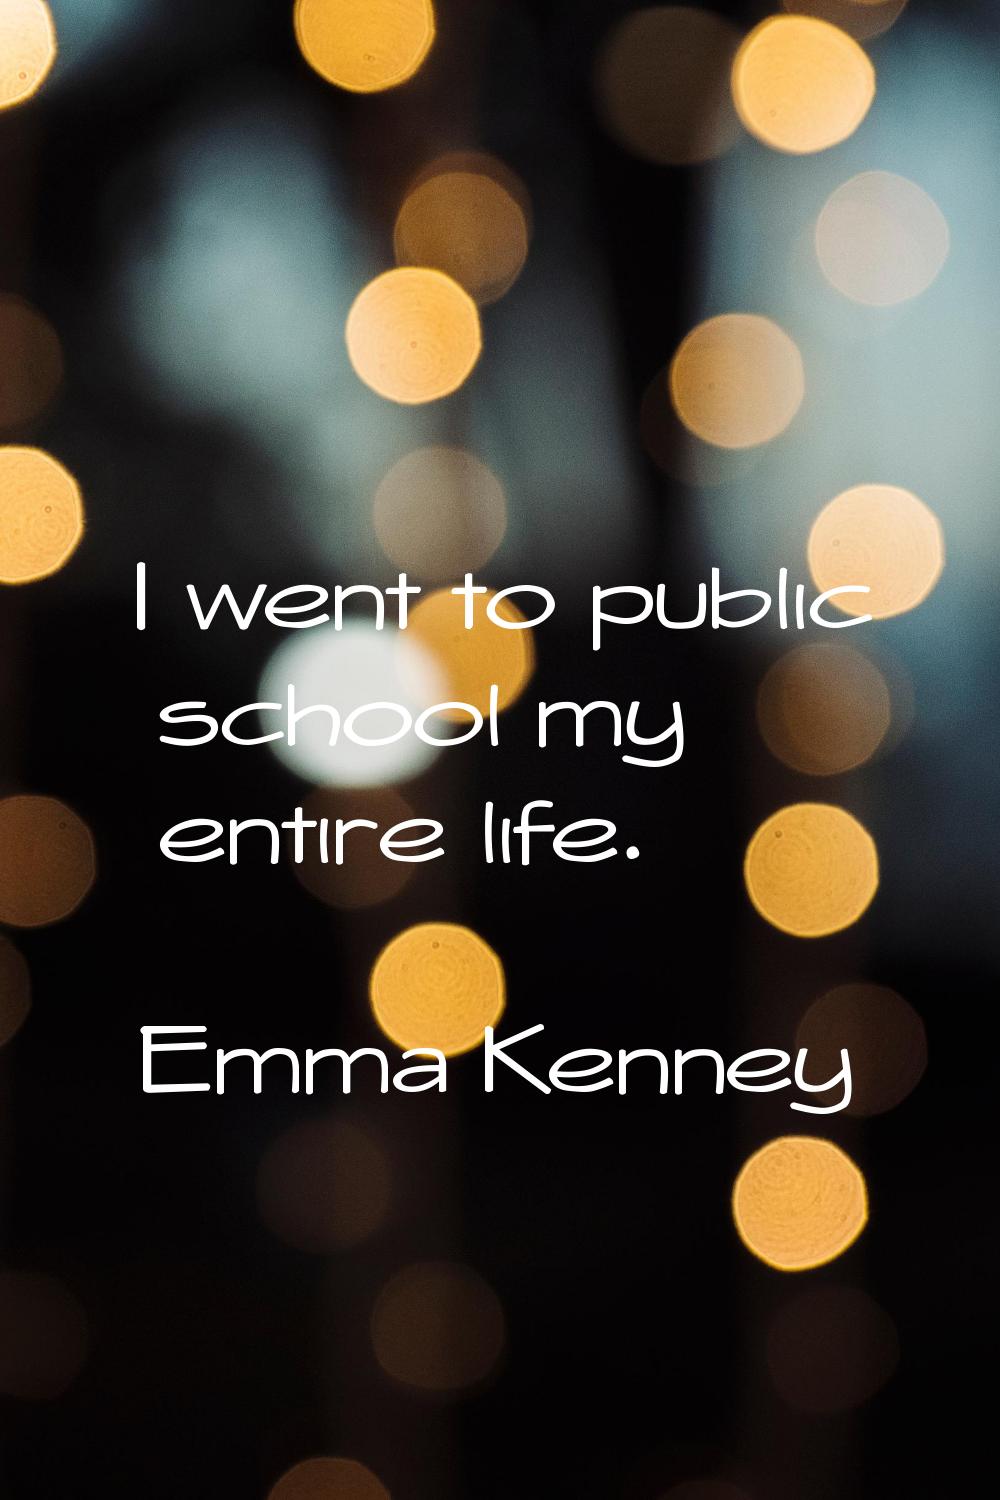 I went to public school my entire life.